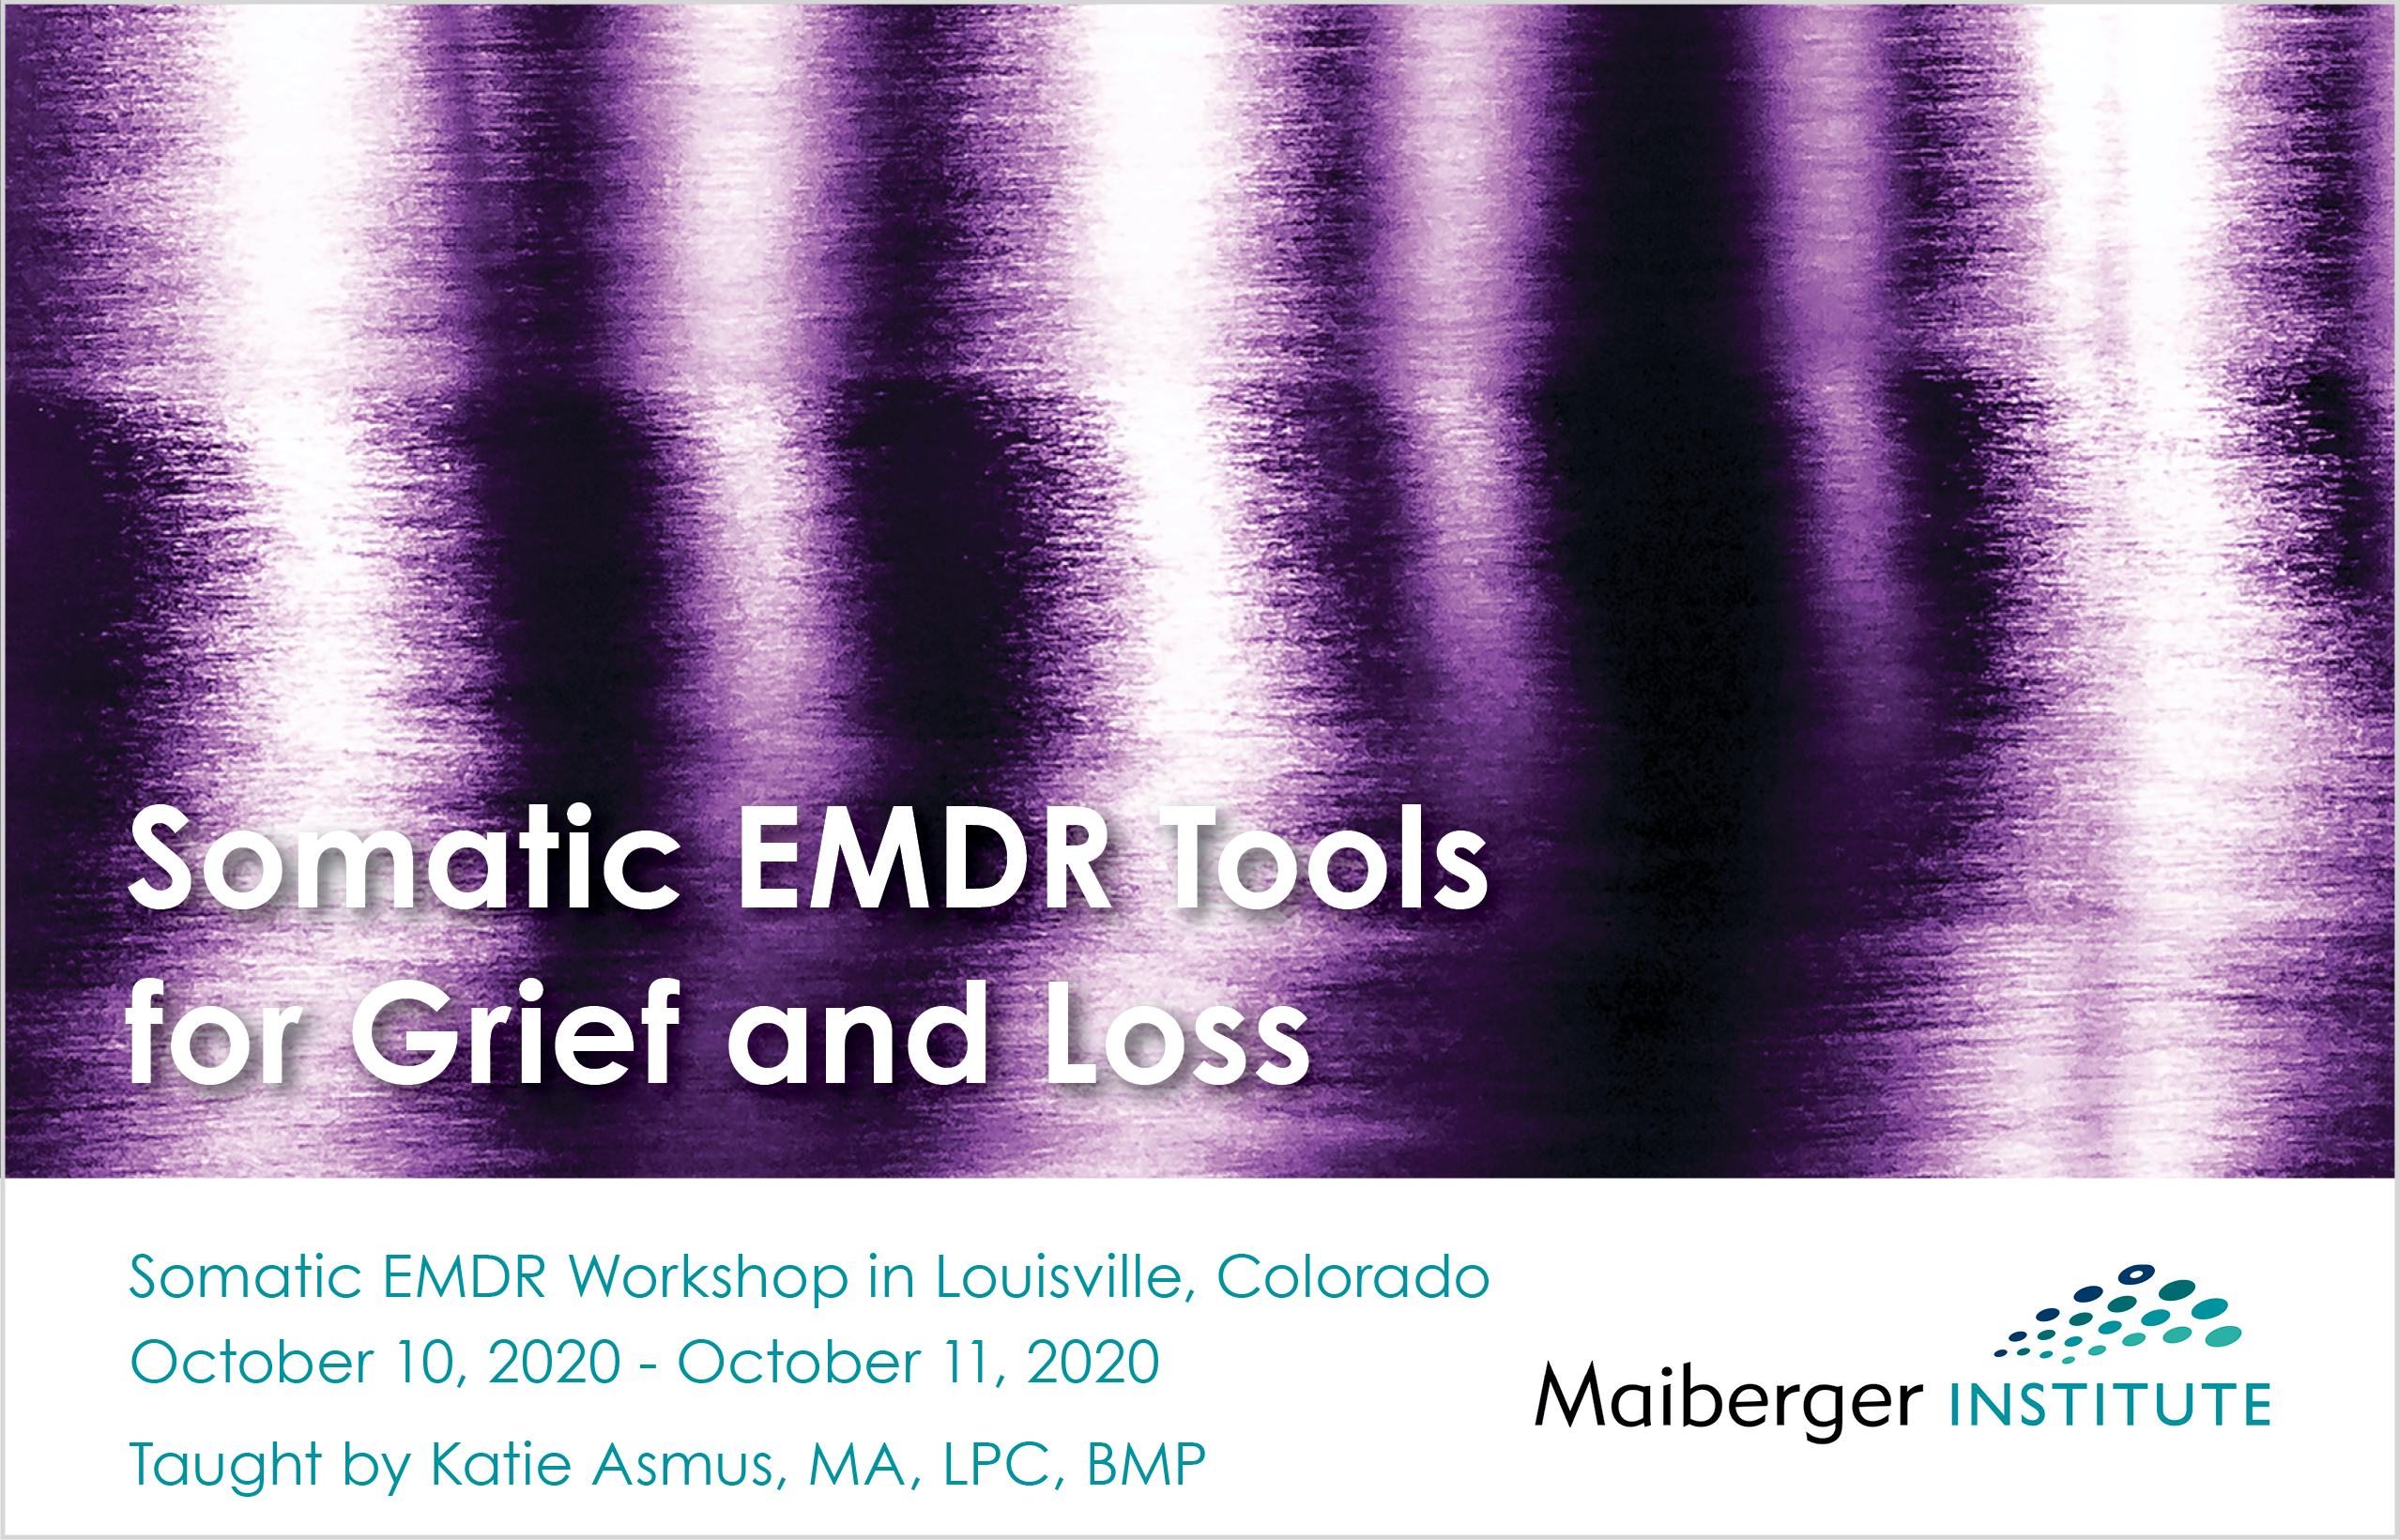 Somatic EMDR Tools for Grief and Loss - October 10, 2020 to October 11, 2020 - Louisville, Colorado - Maiberger Institute - EMDR Events Calendar